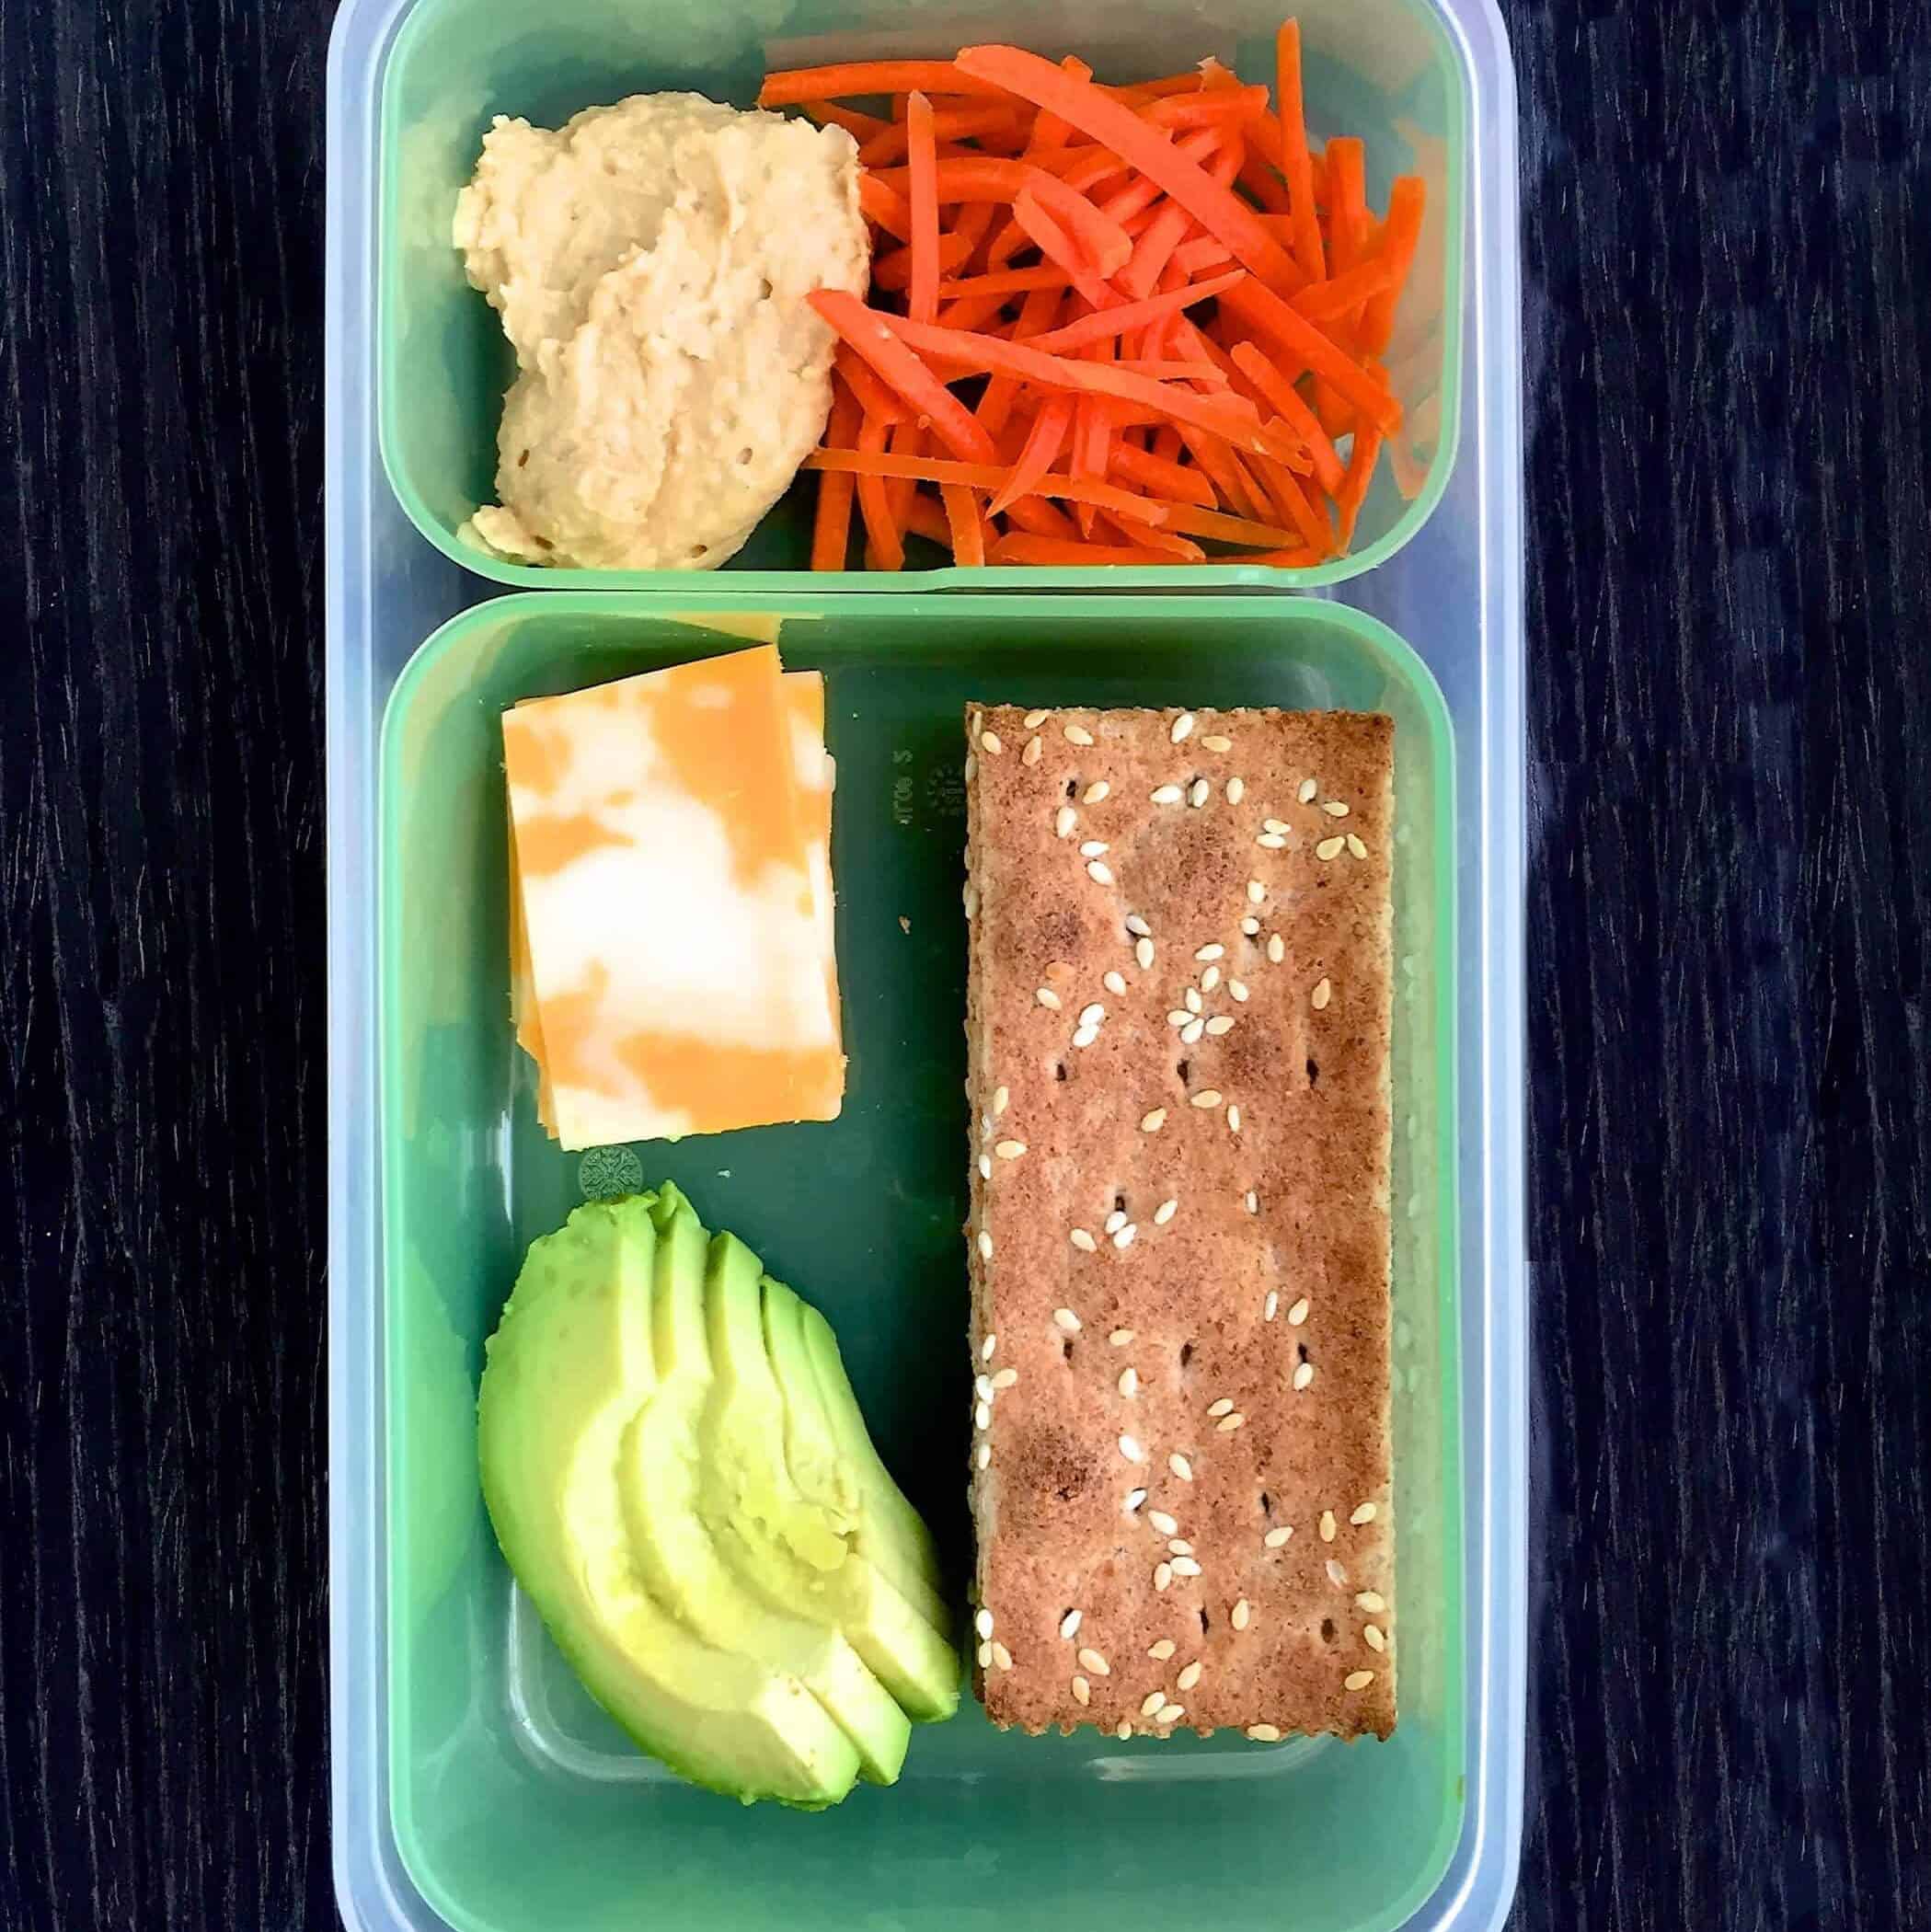 easy school lunch below contains whole grain crackers, cheese, hummus,  avocado slices, and shredded carrots